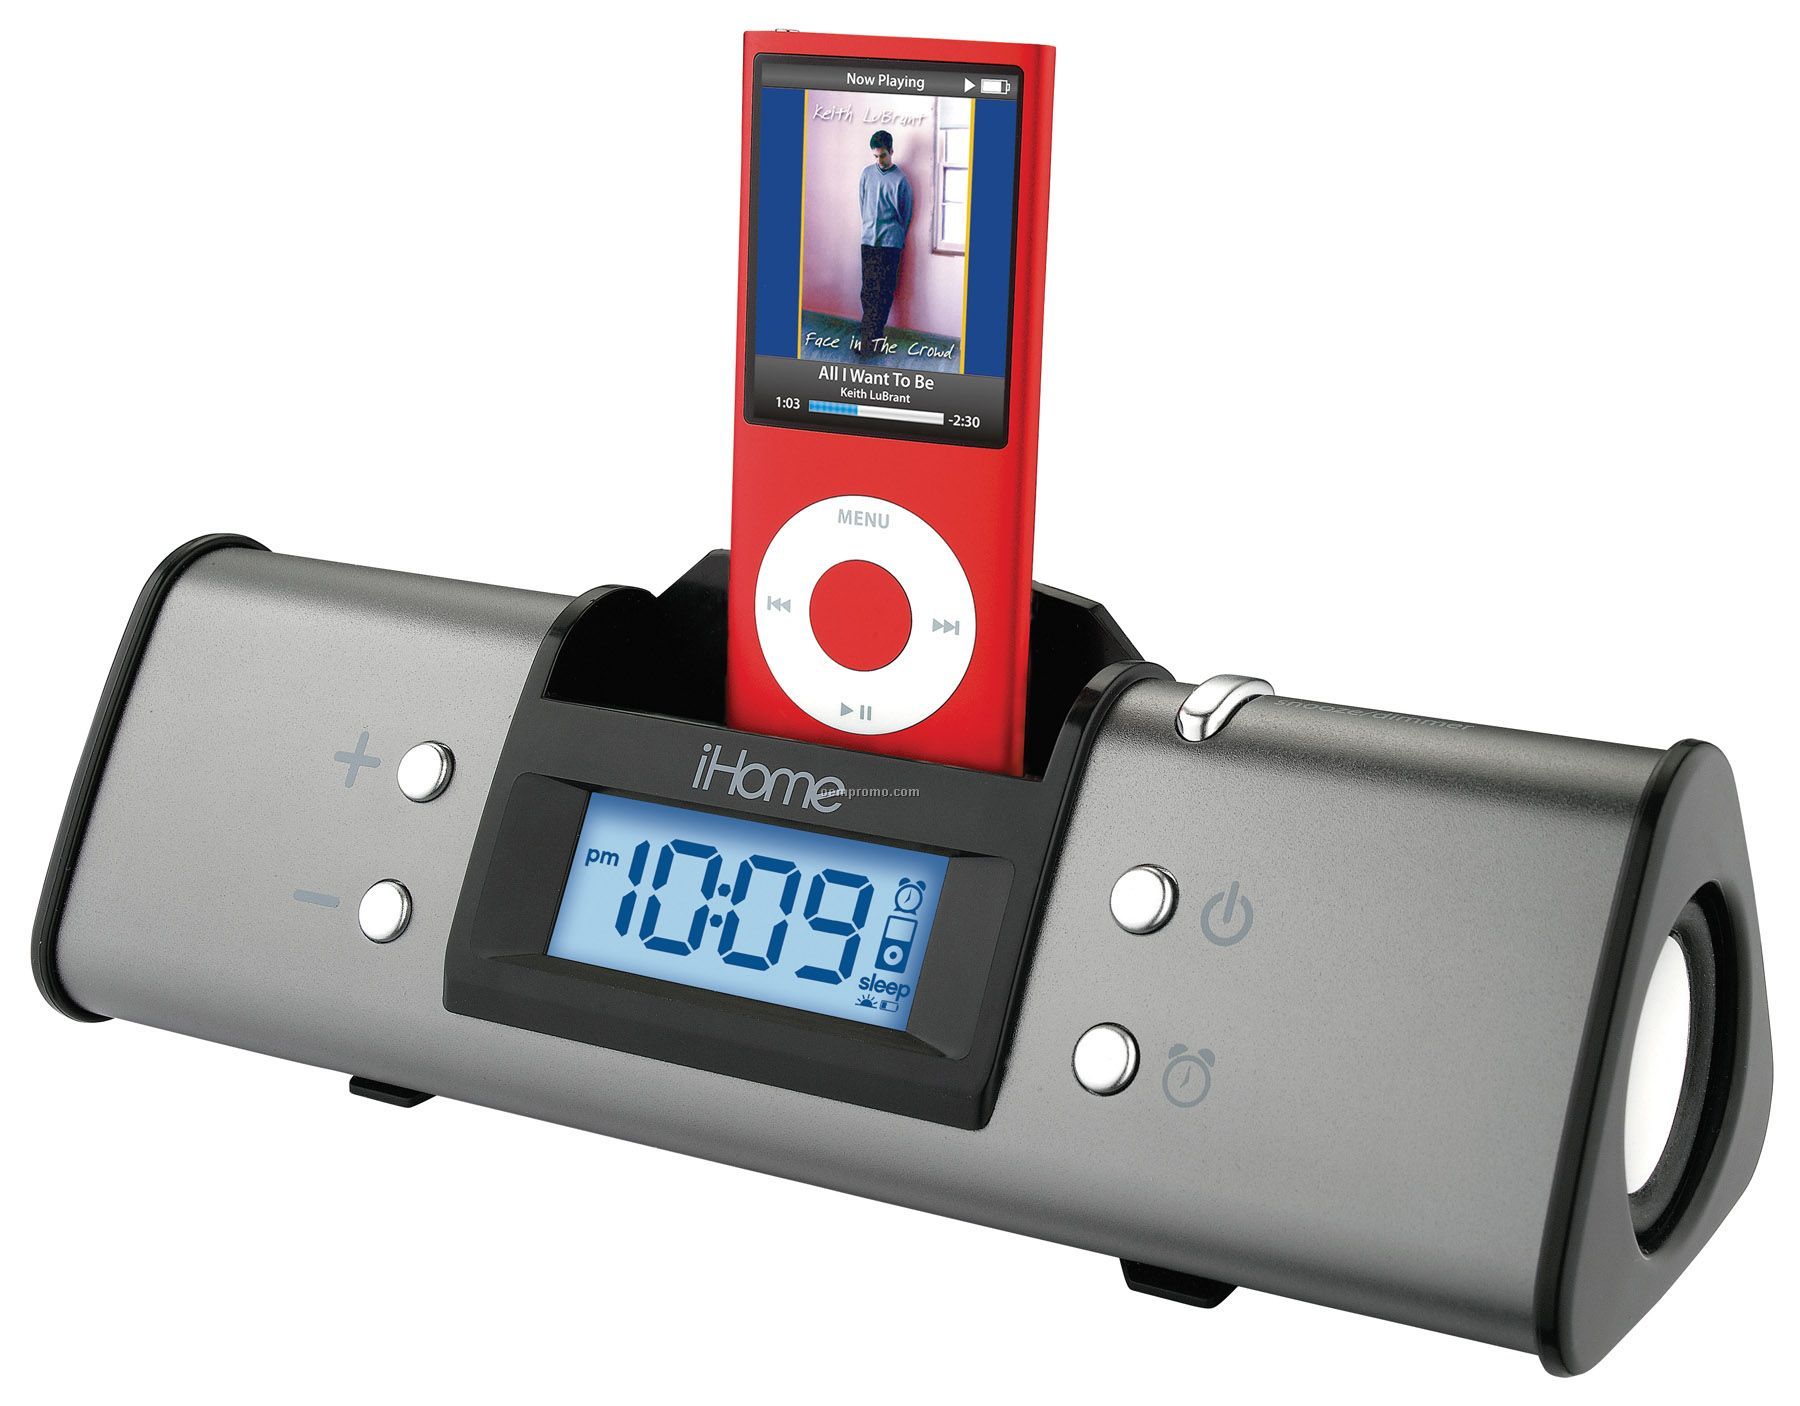 Ihome Portable Stereo Alarm Clock Speakers For Ipod